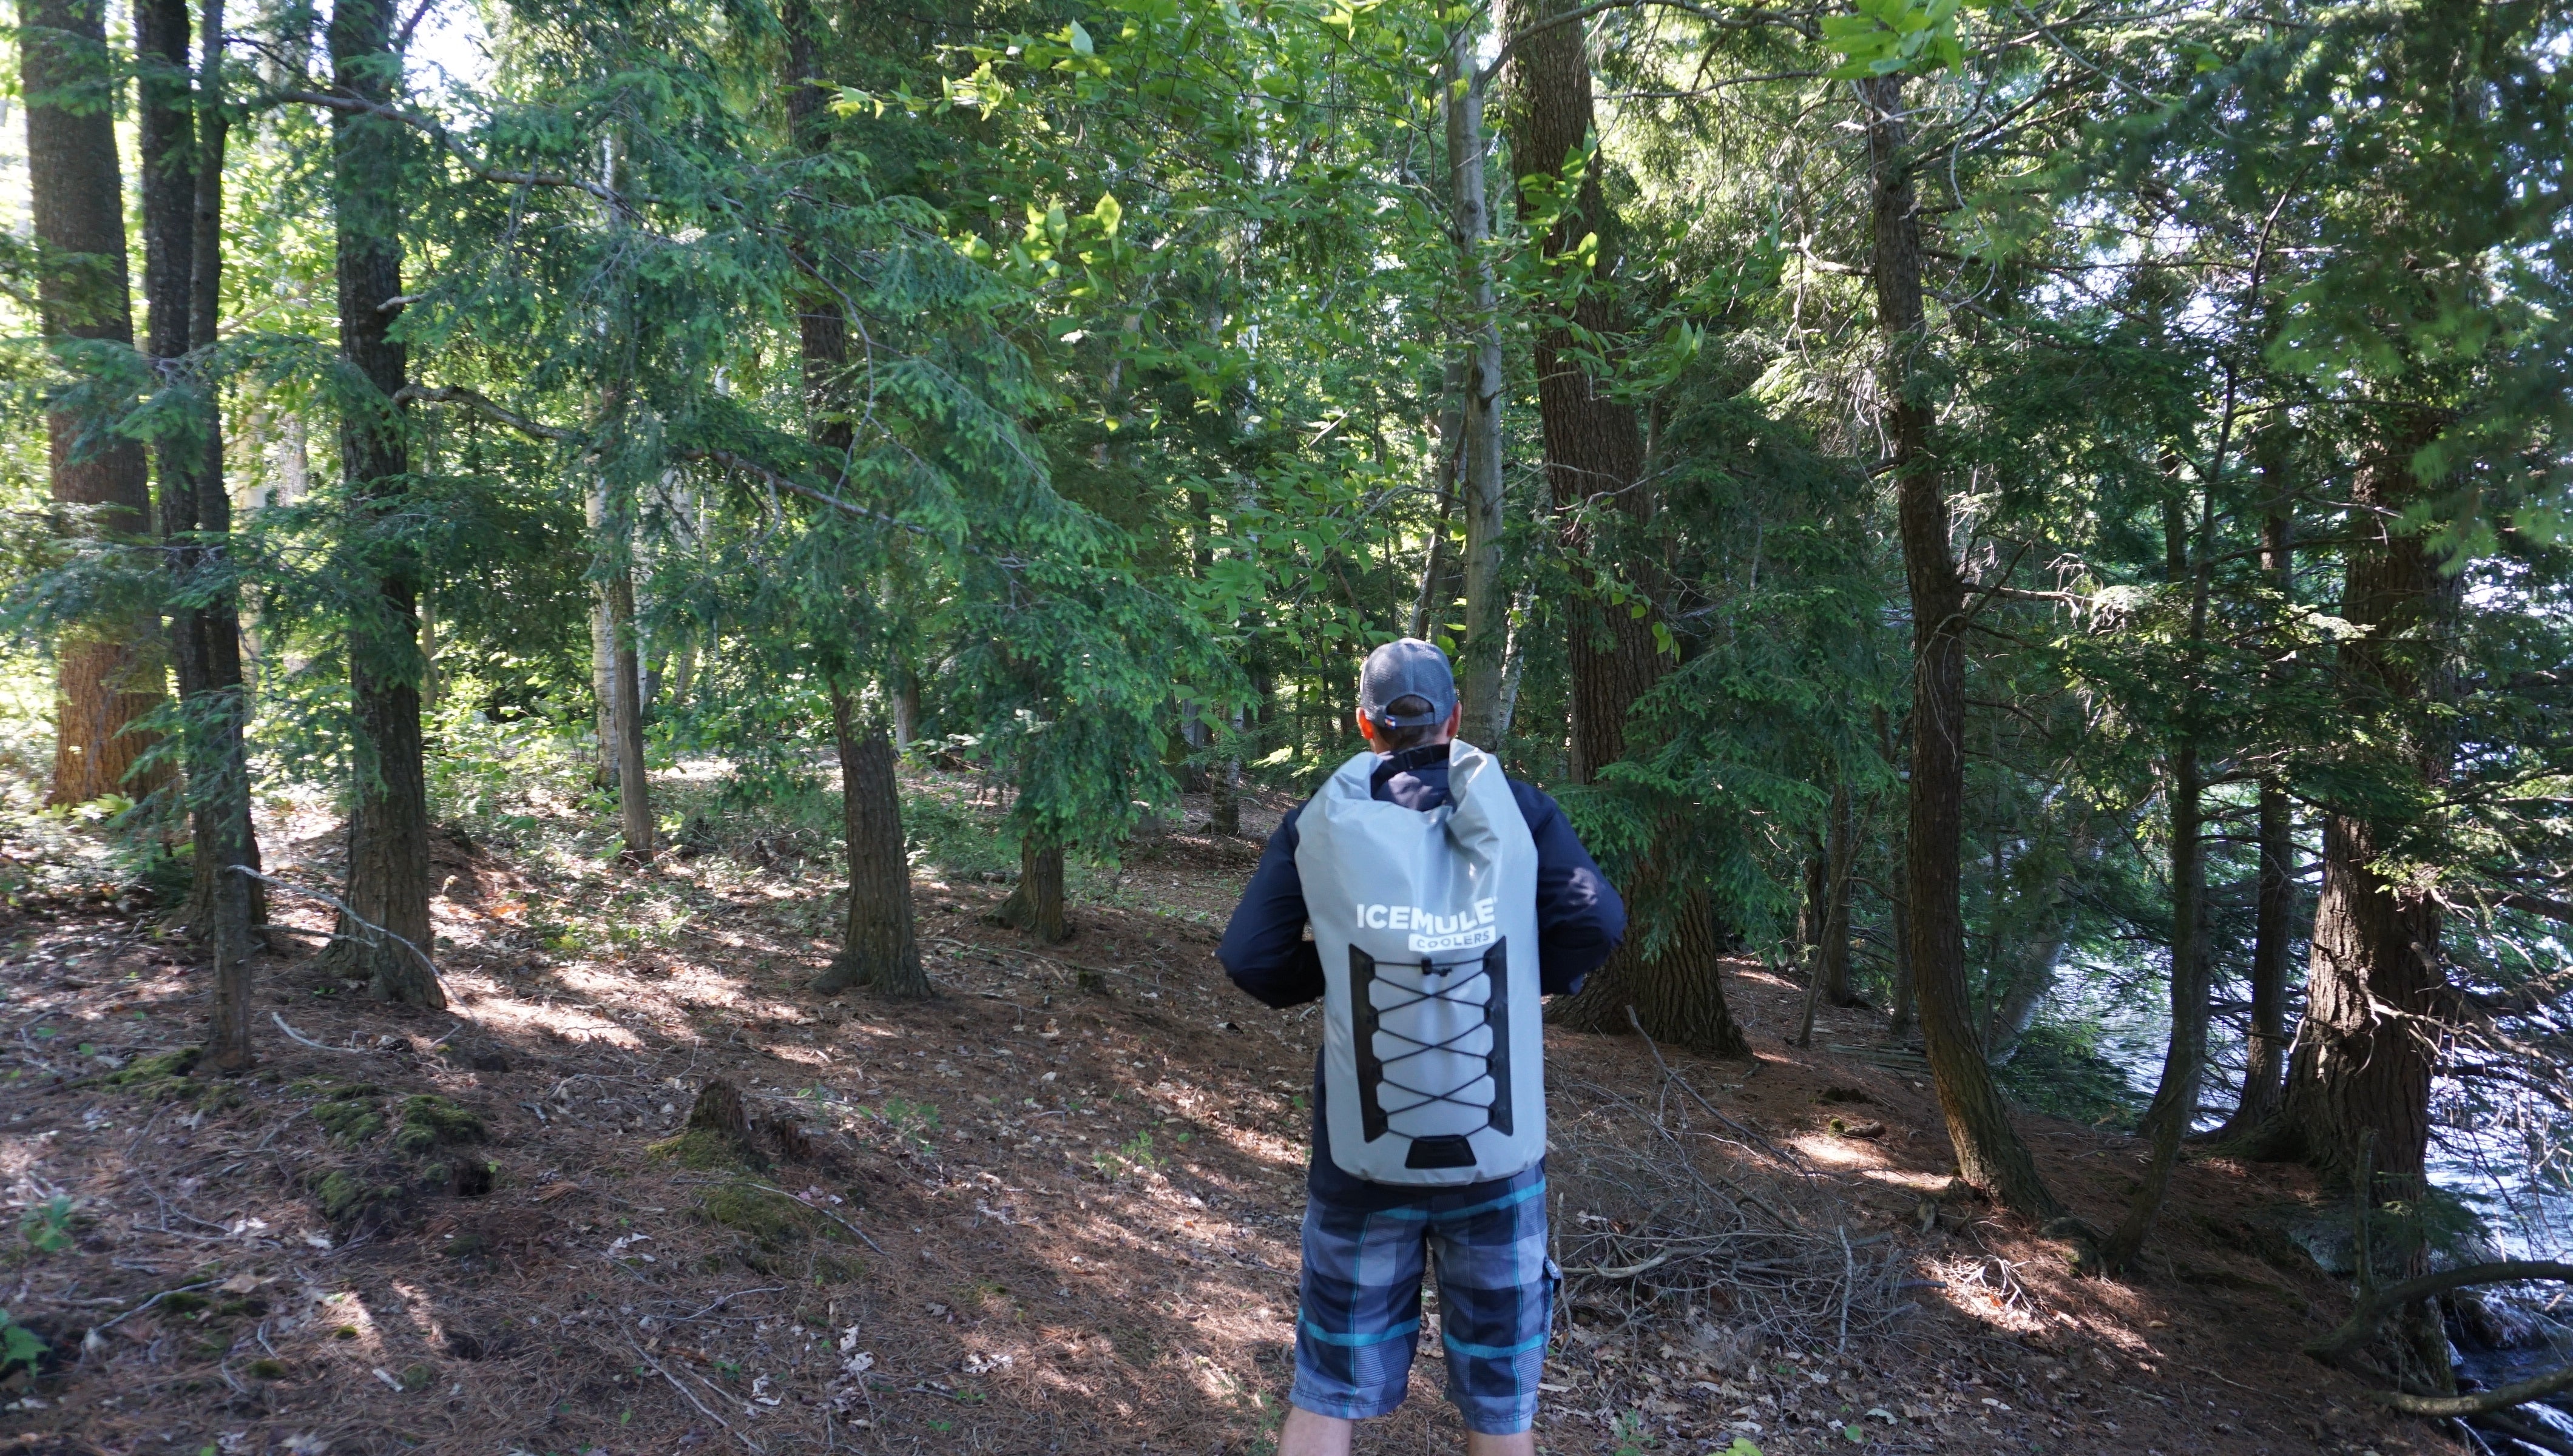 Shoulder straps very comfortable for hiking and distributing heavy loads thanks to the sternum strap.